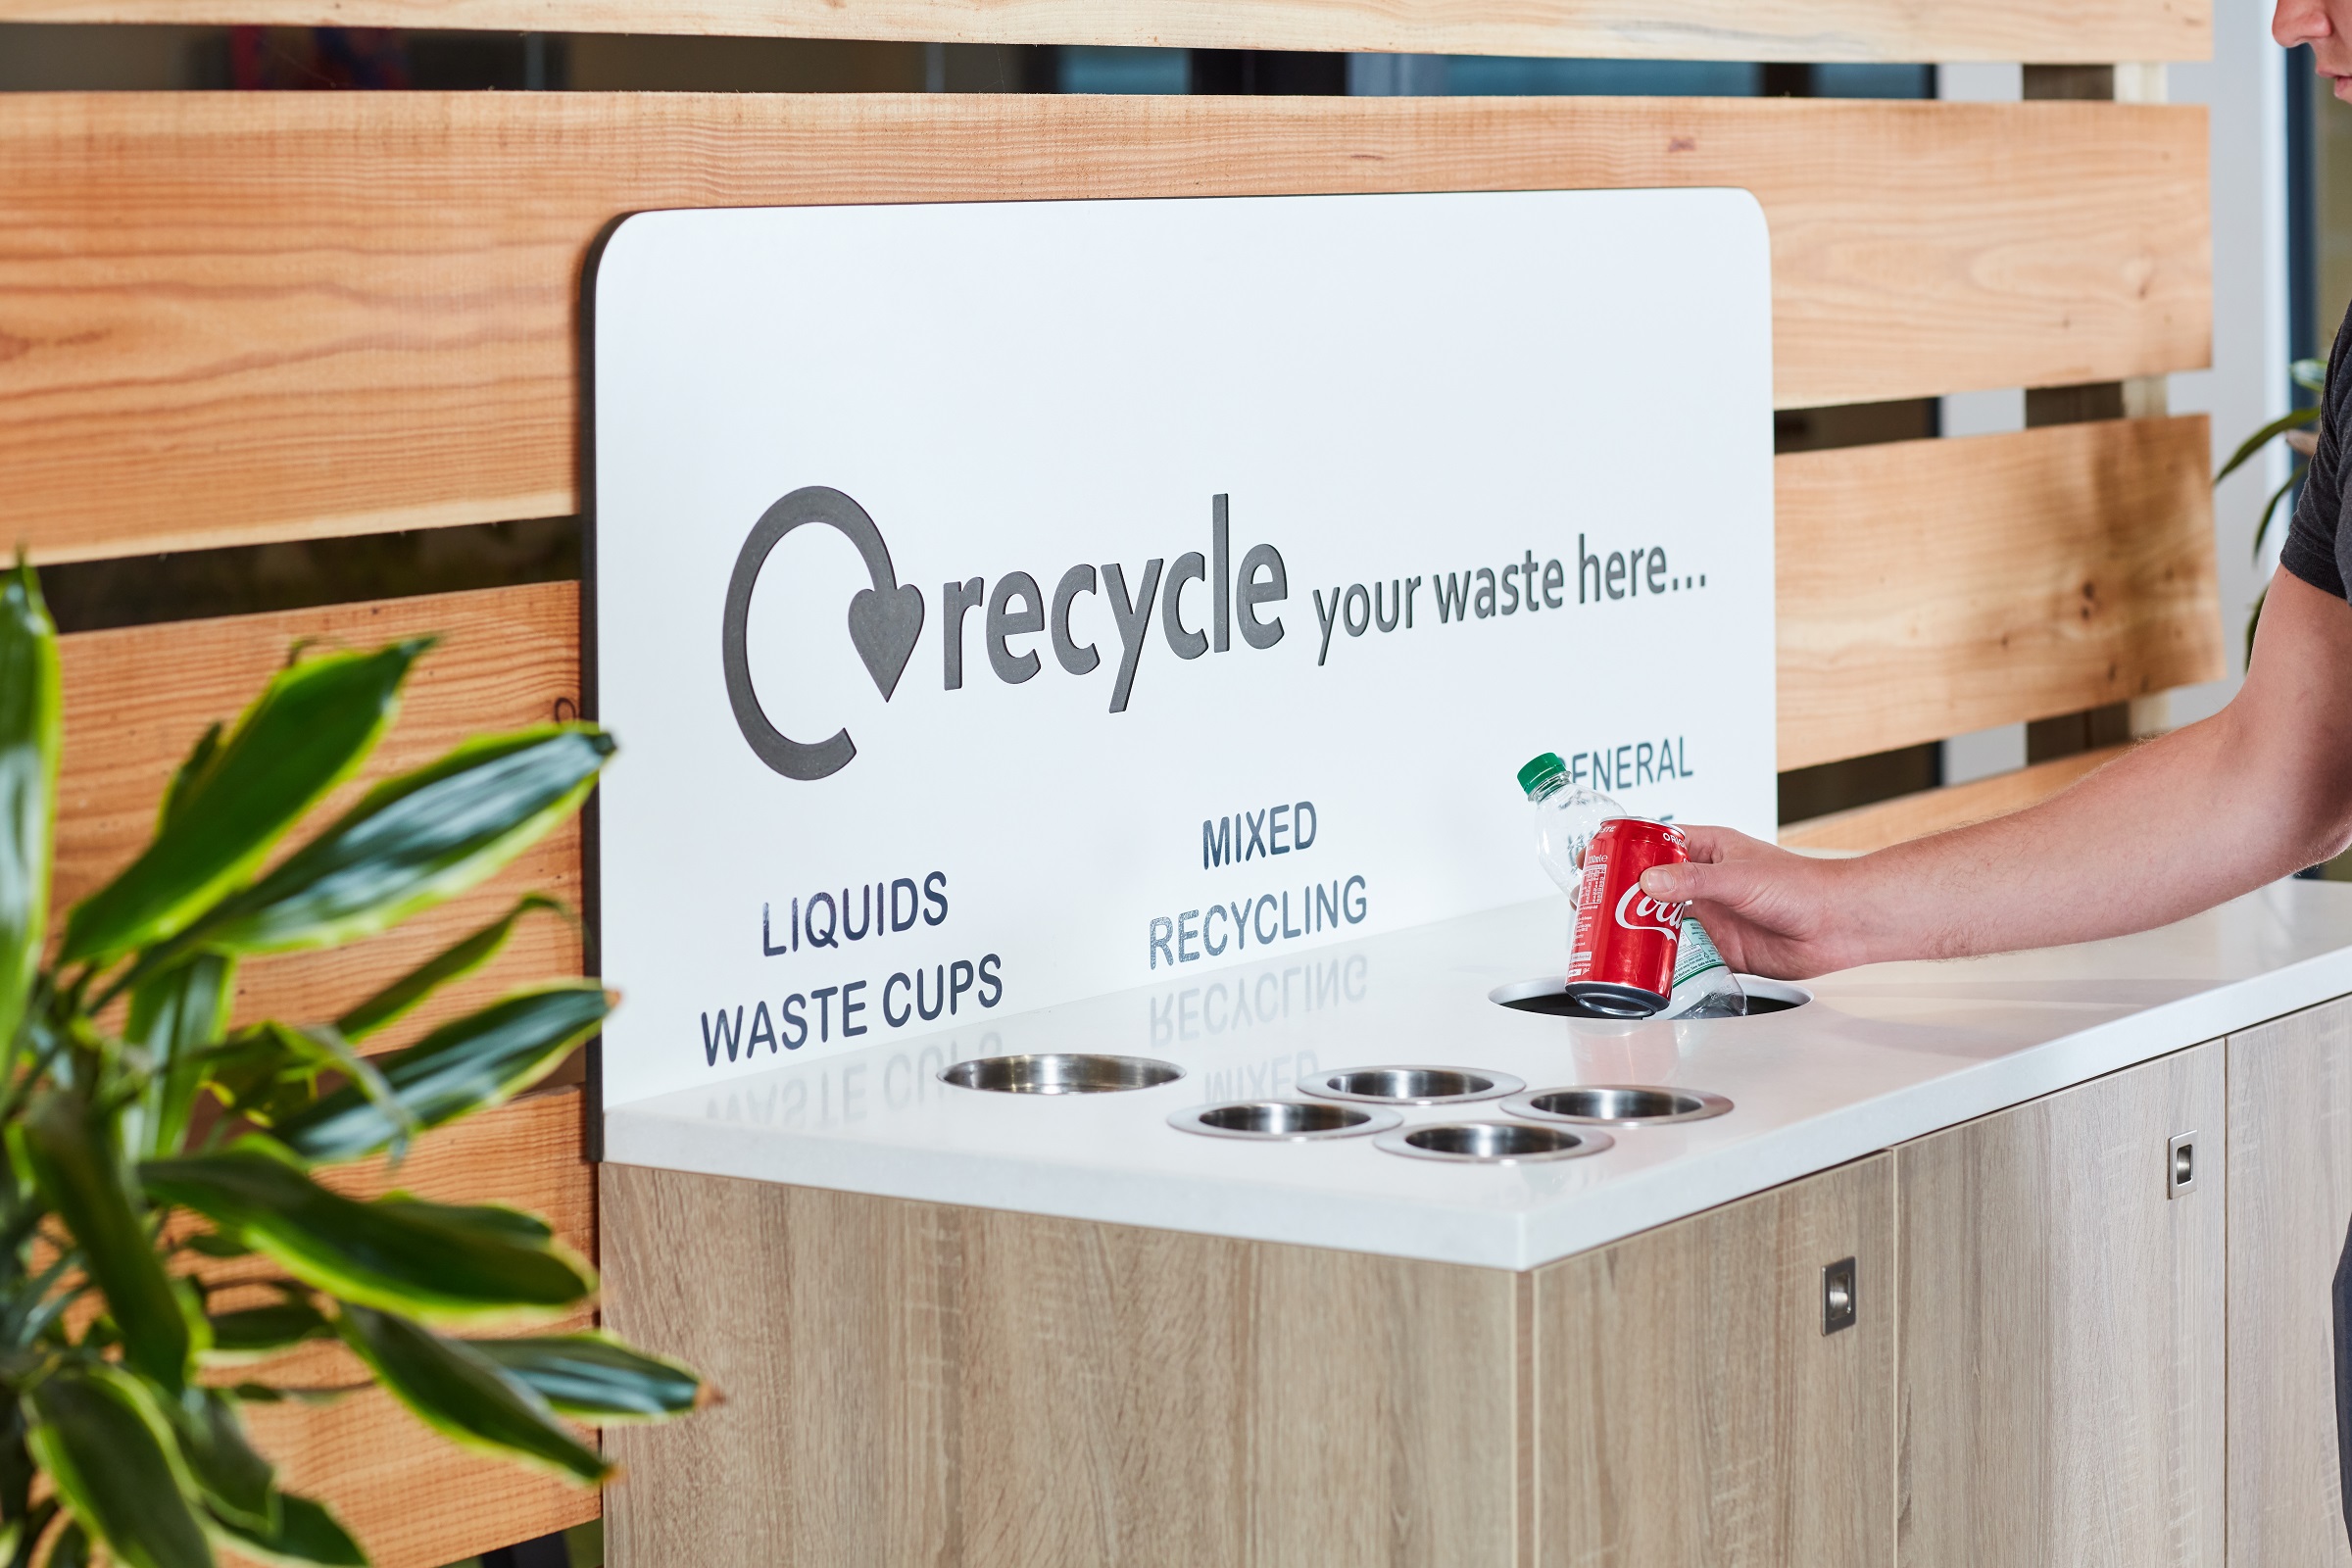 recycling stations frequently asked questions about recycling bins